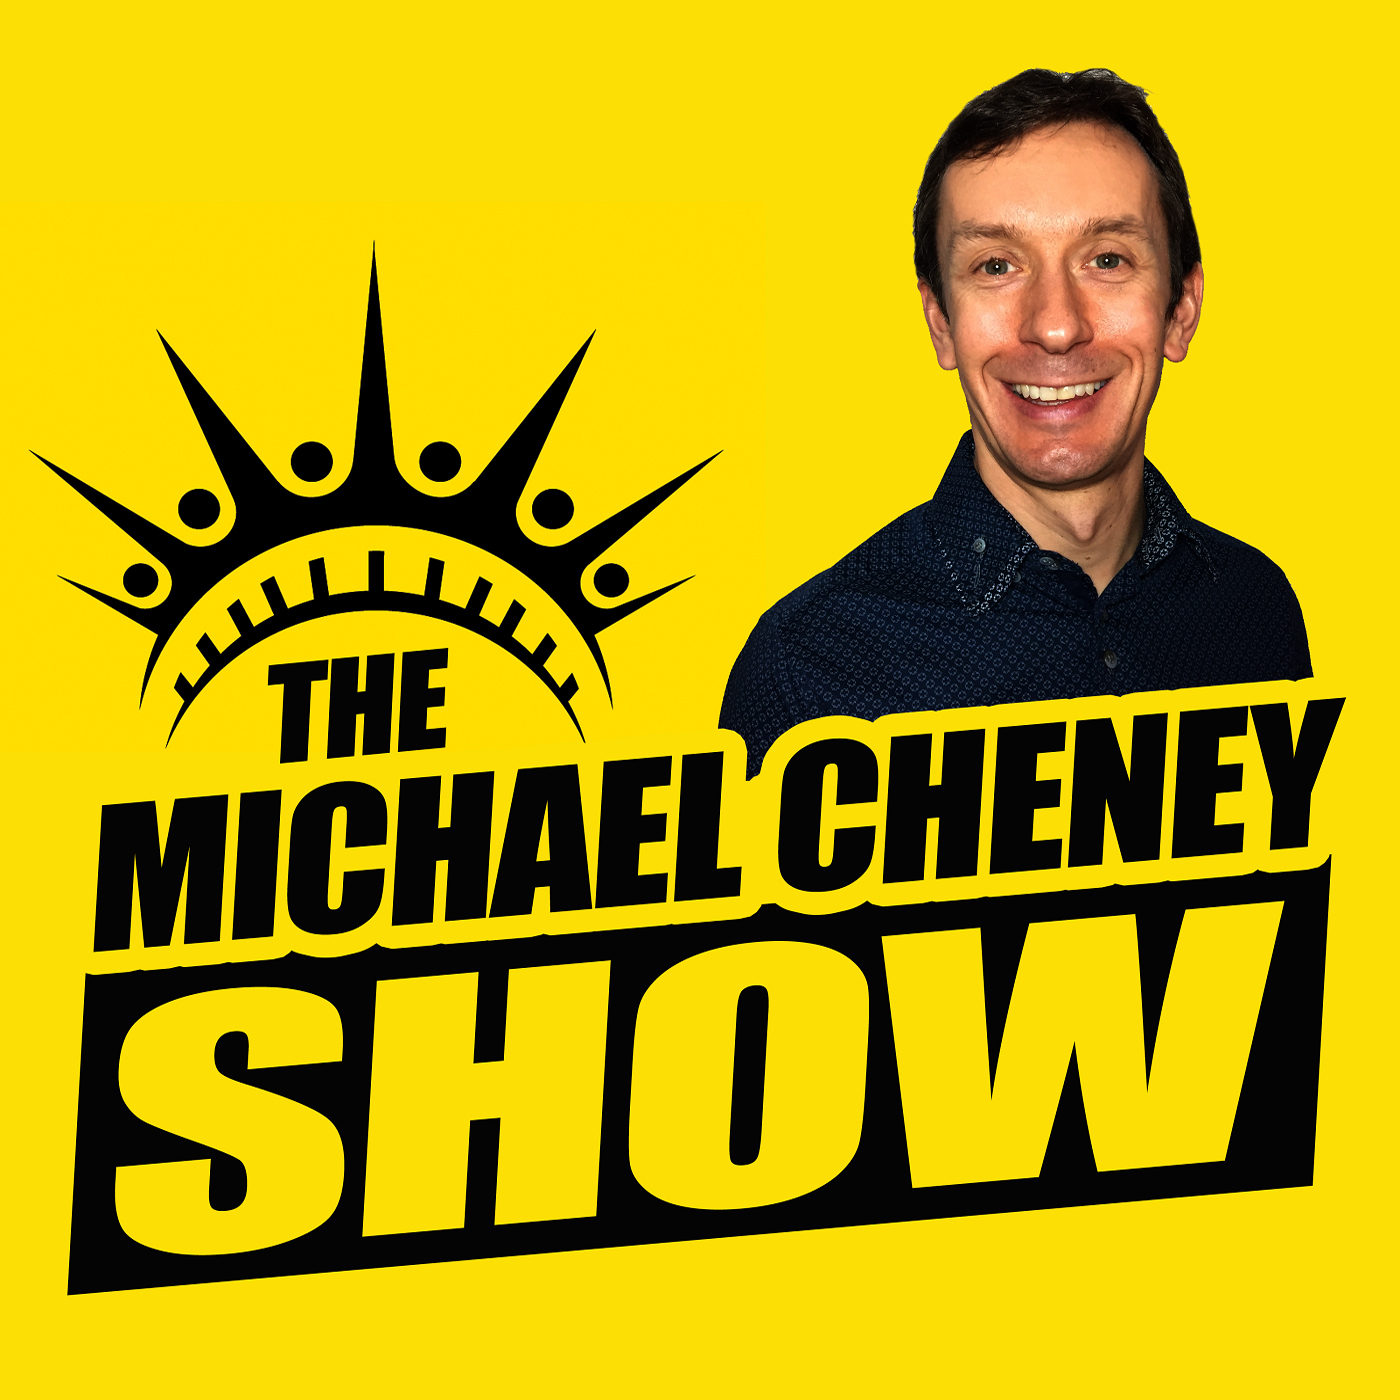 The Michael Cheney Show